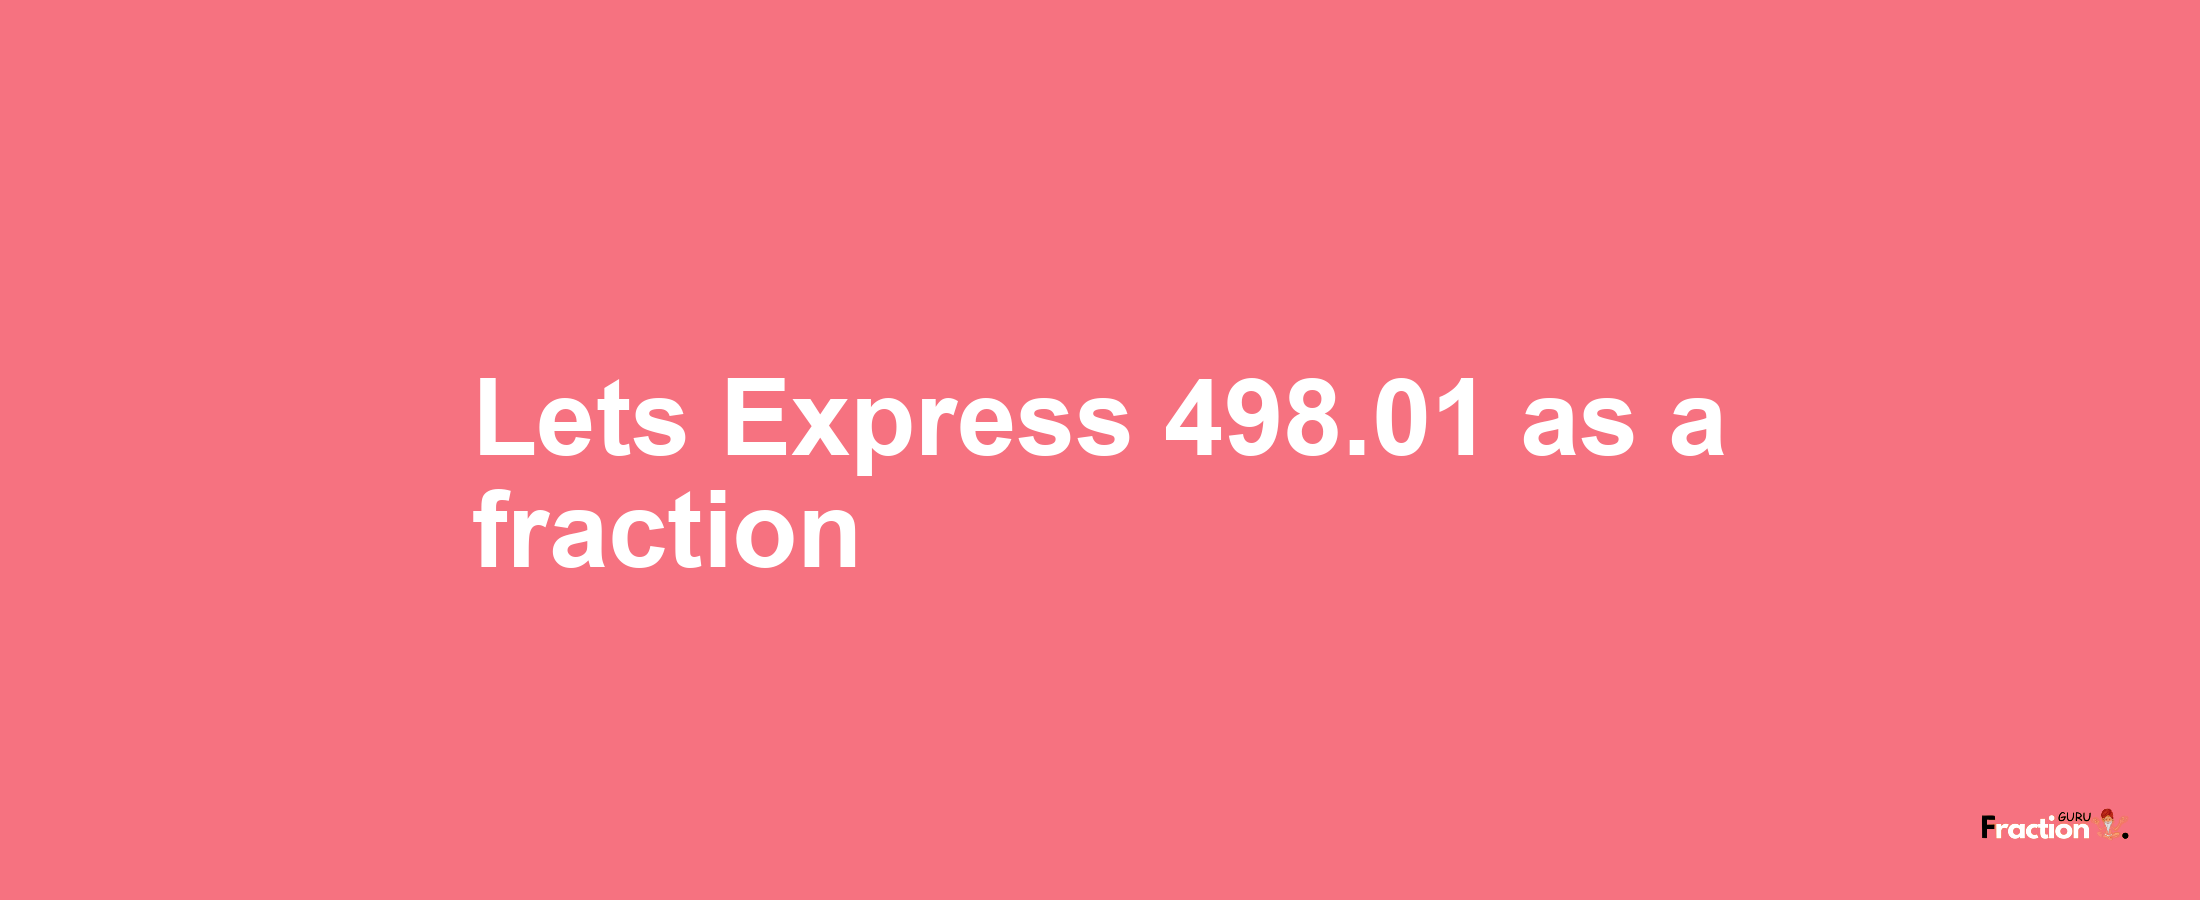 Lets Express 498.01 as afraction